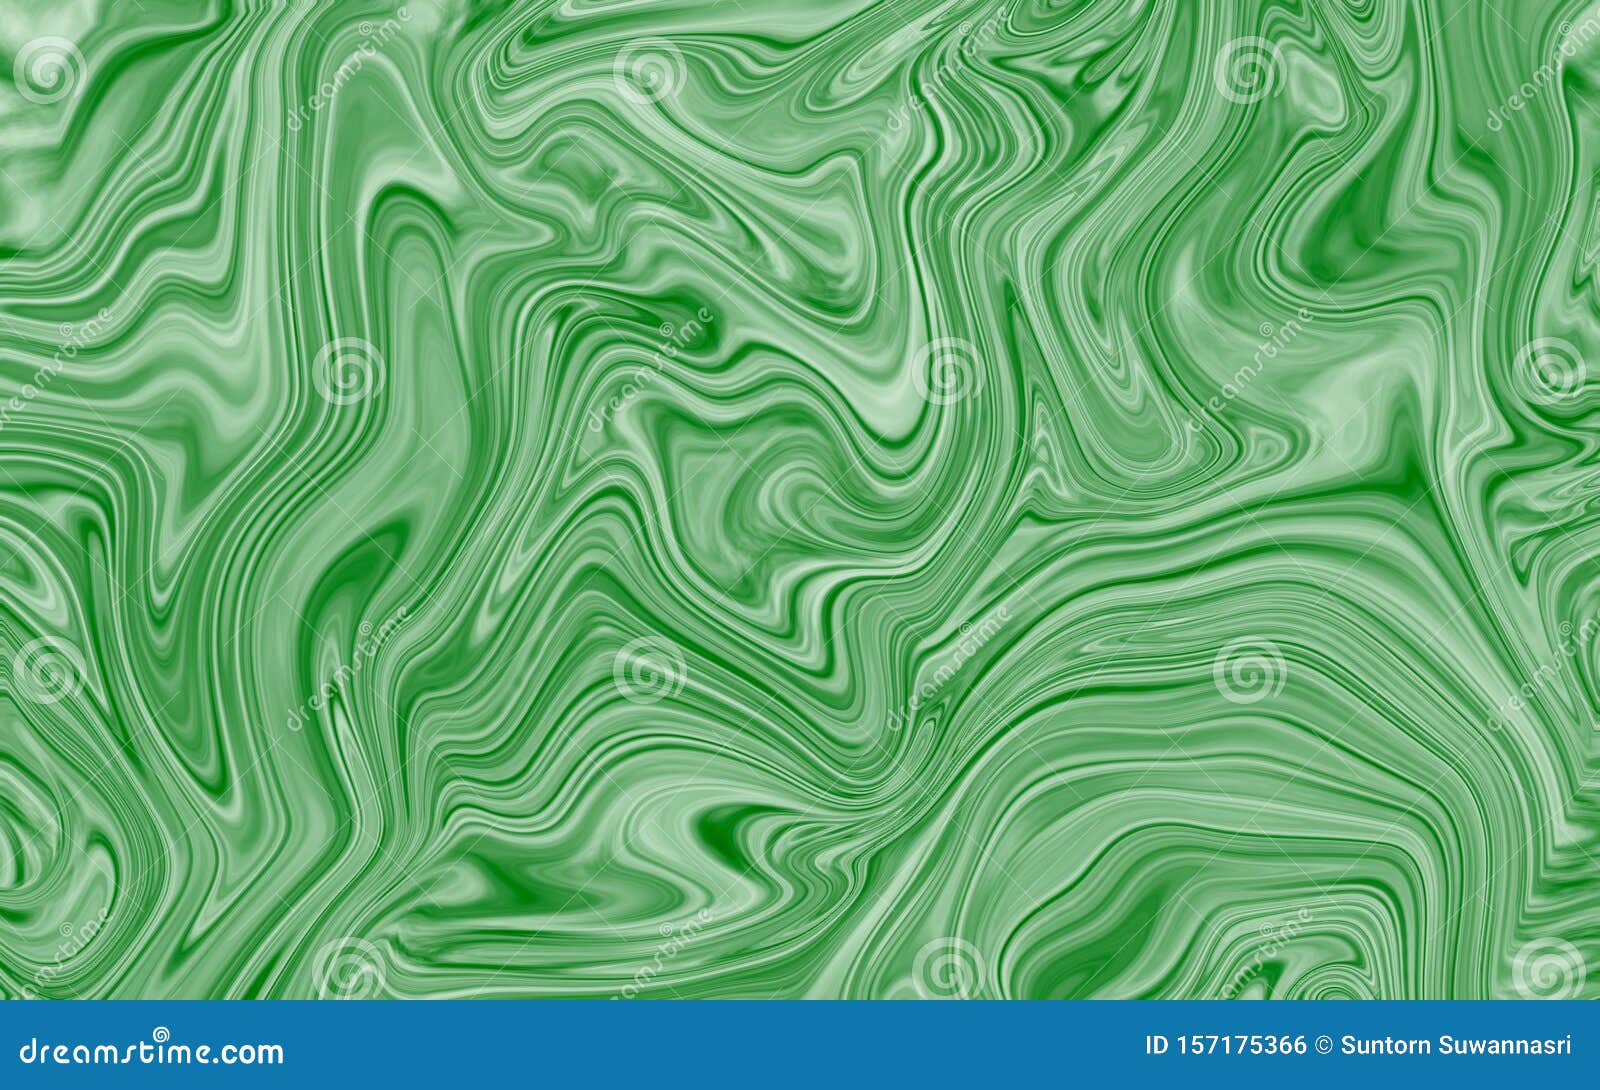 Abstract Green Liquid Marble Swirl Texture Background Stock Photo - Image  of background, green: 157175366